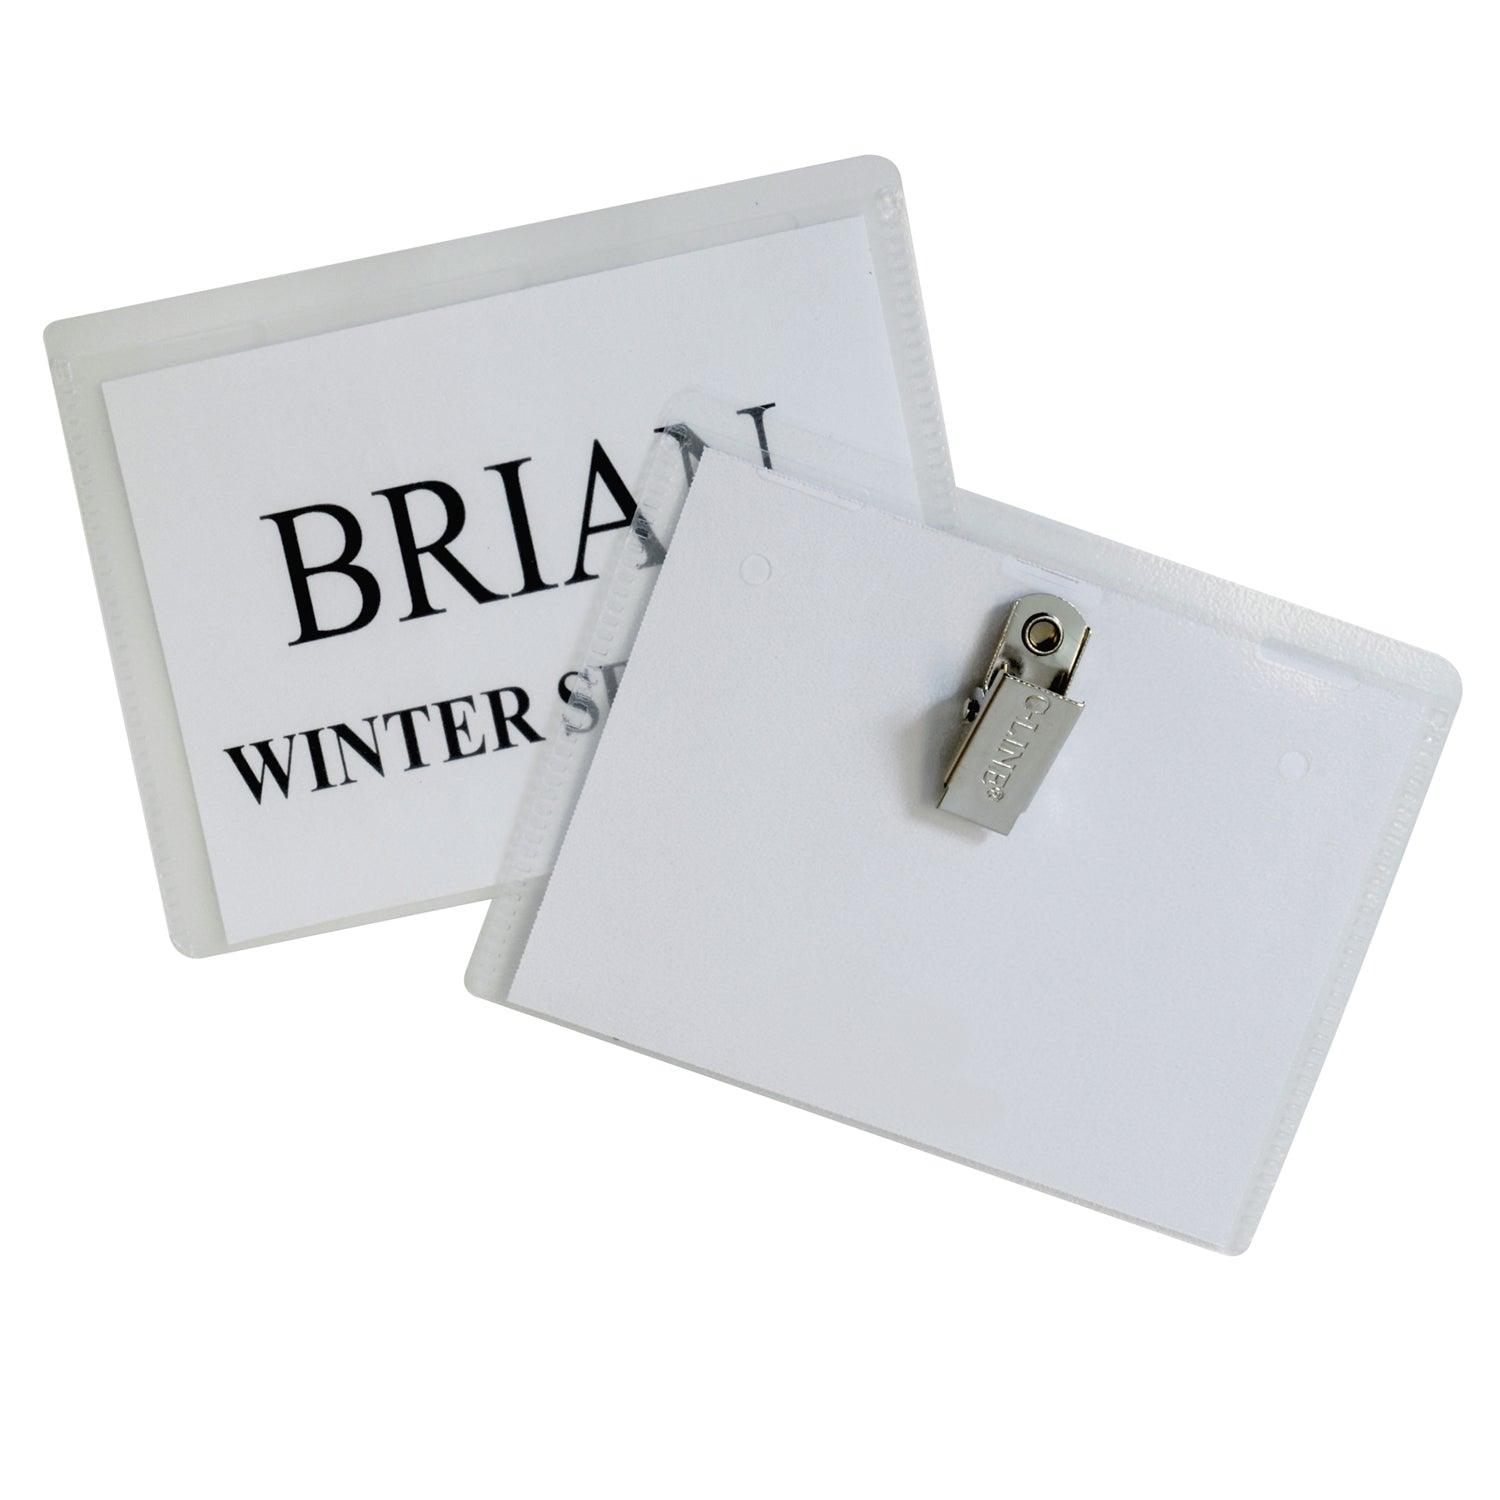 Clip Style Name Badge Holder Kit, Sealed Holders with Inserts, 3-1/2" x 2-1/4", Box of 50 - Loomini